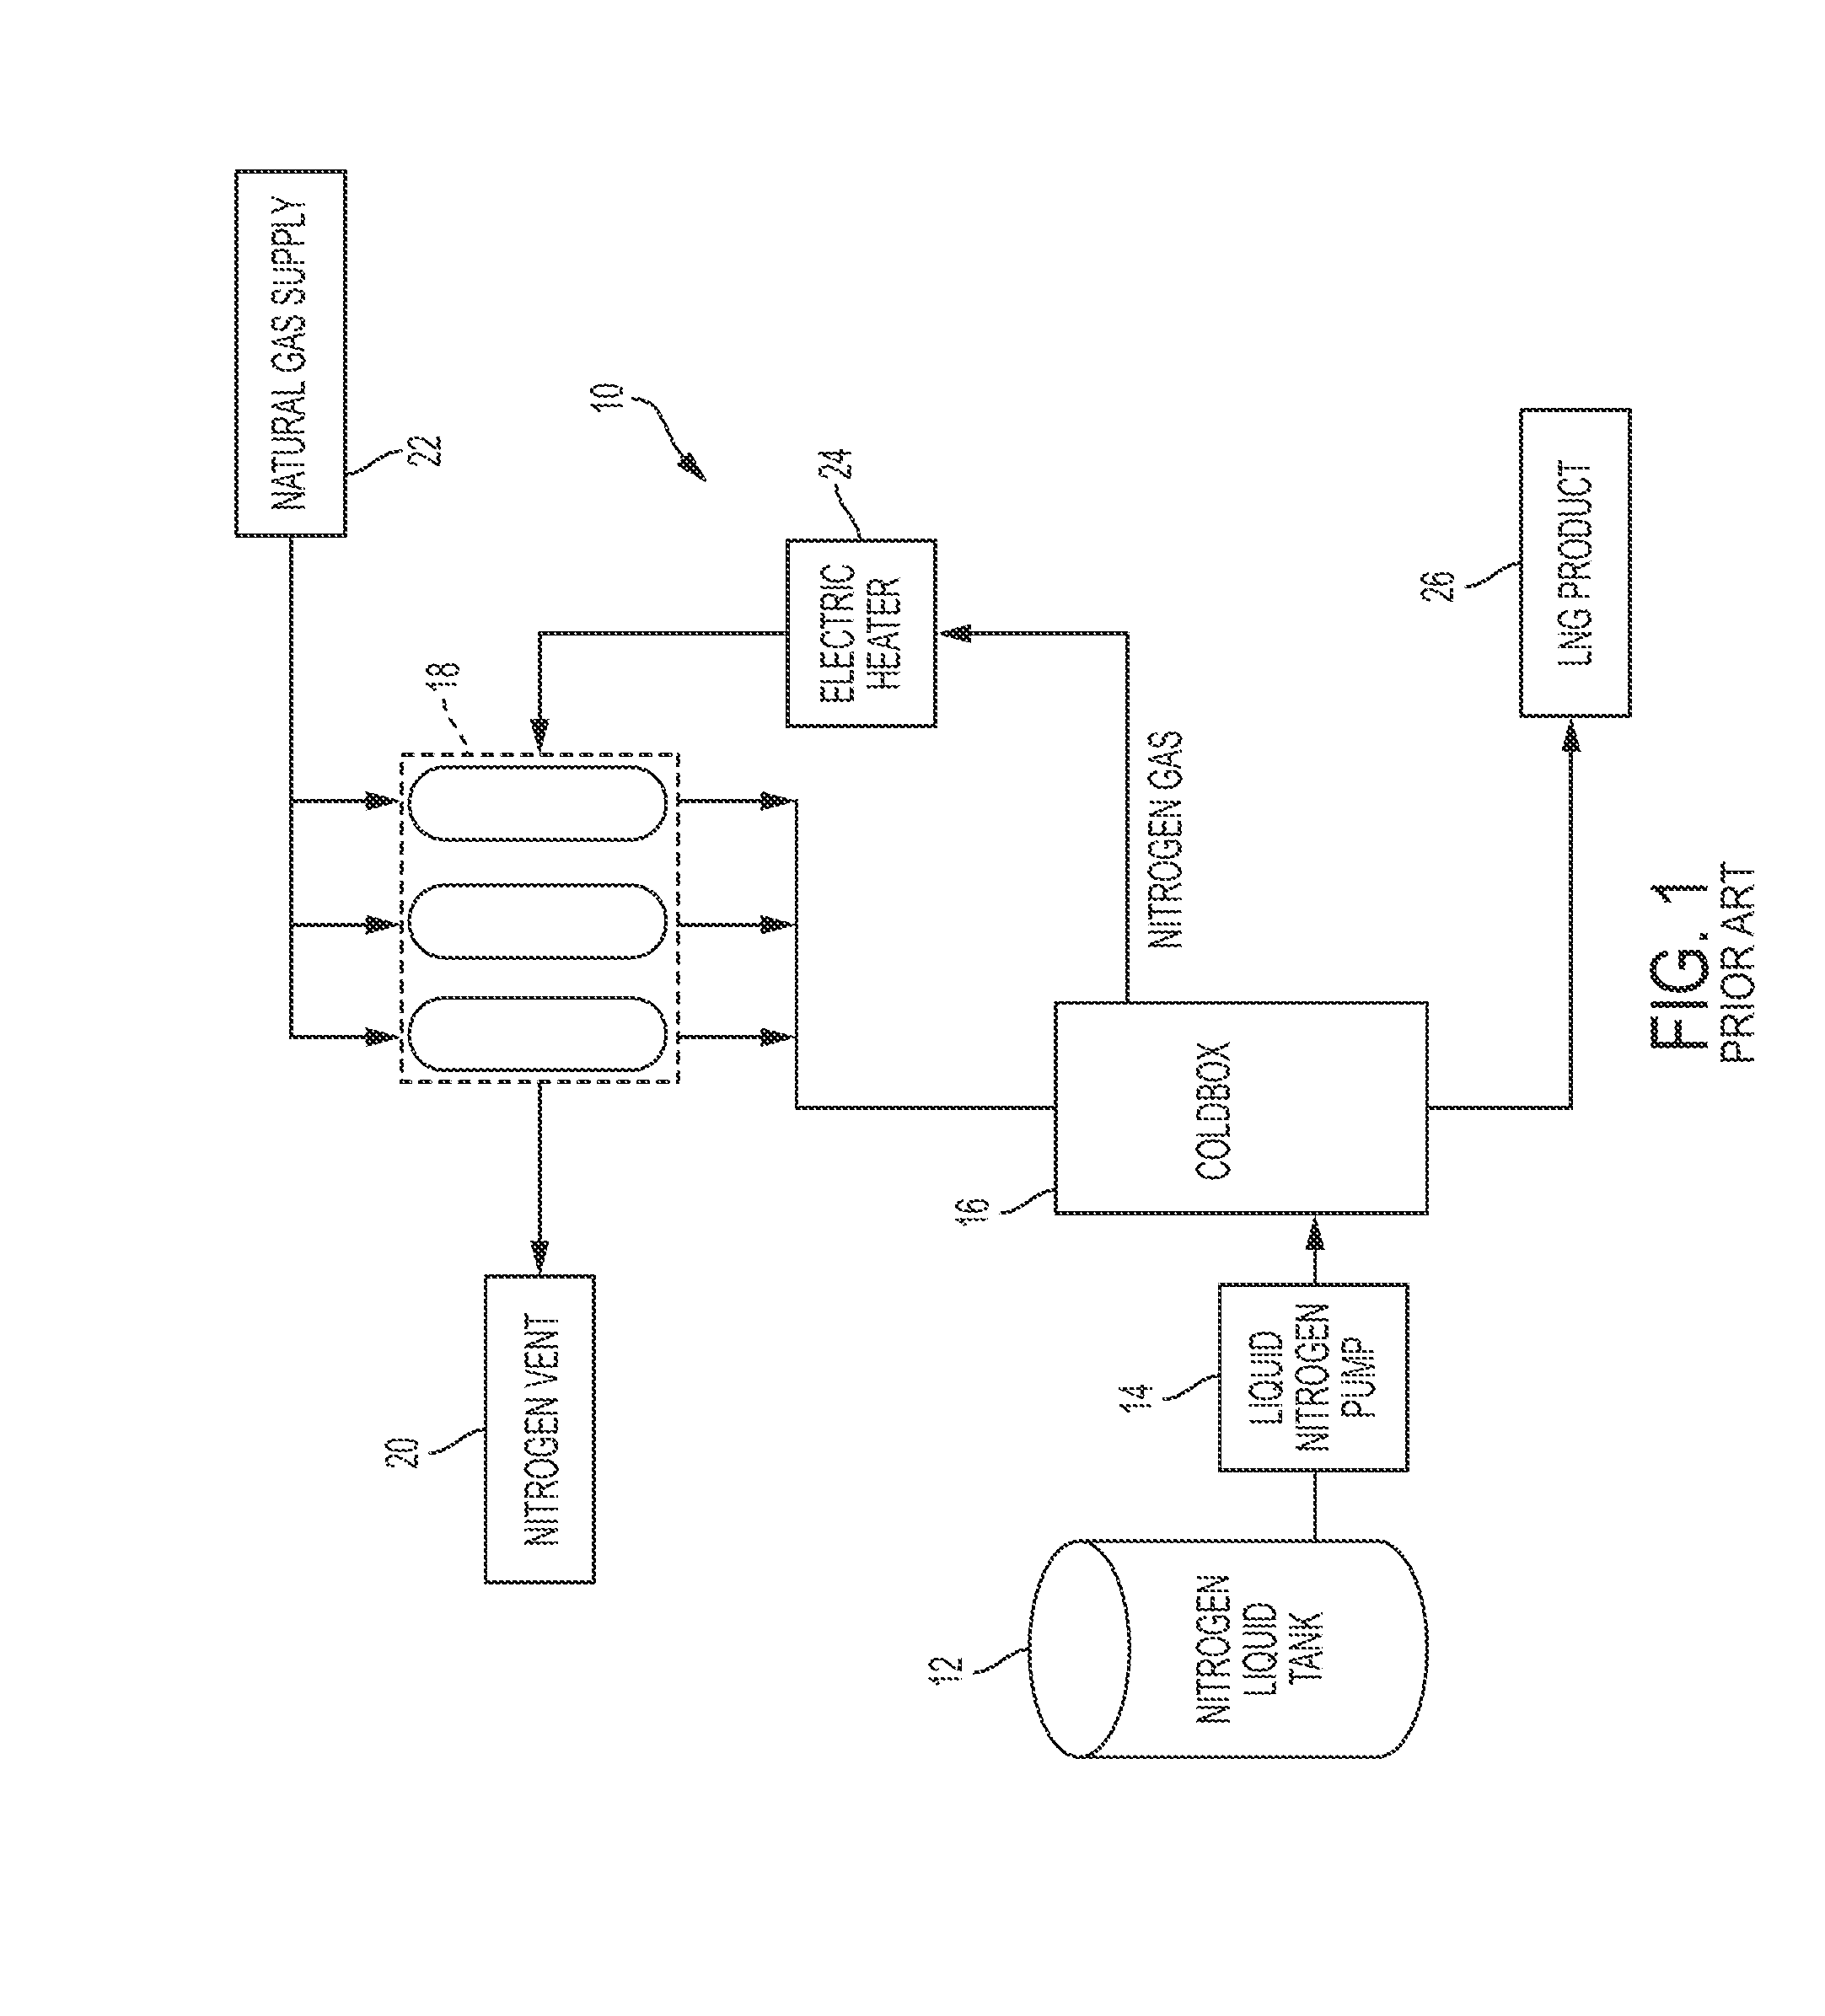 System and method for liquefying natural gas employing turbo expander